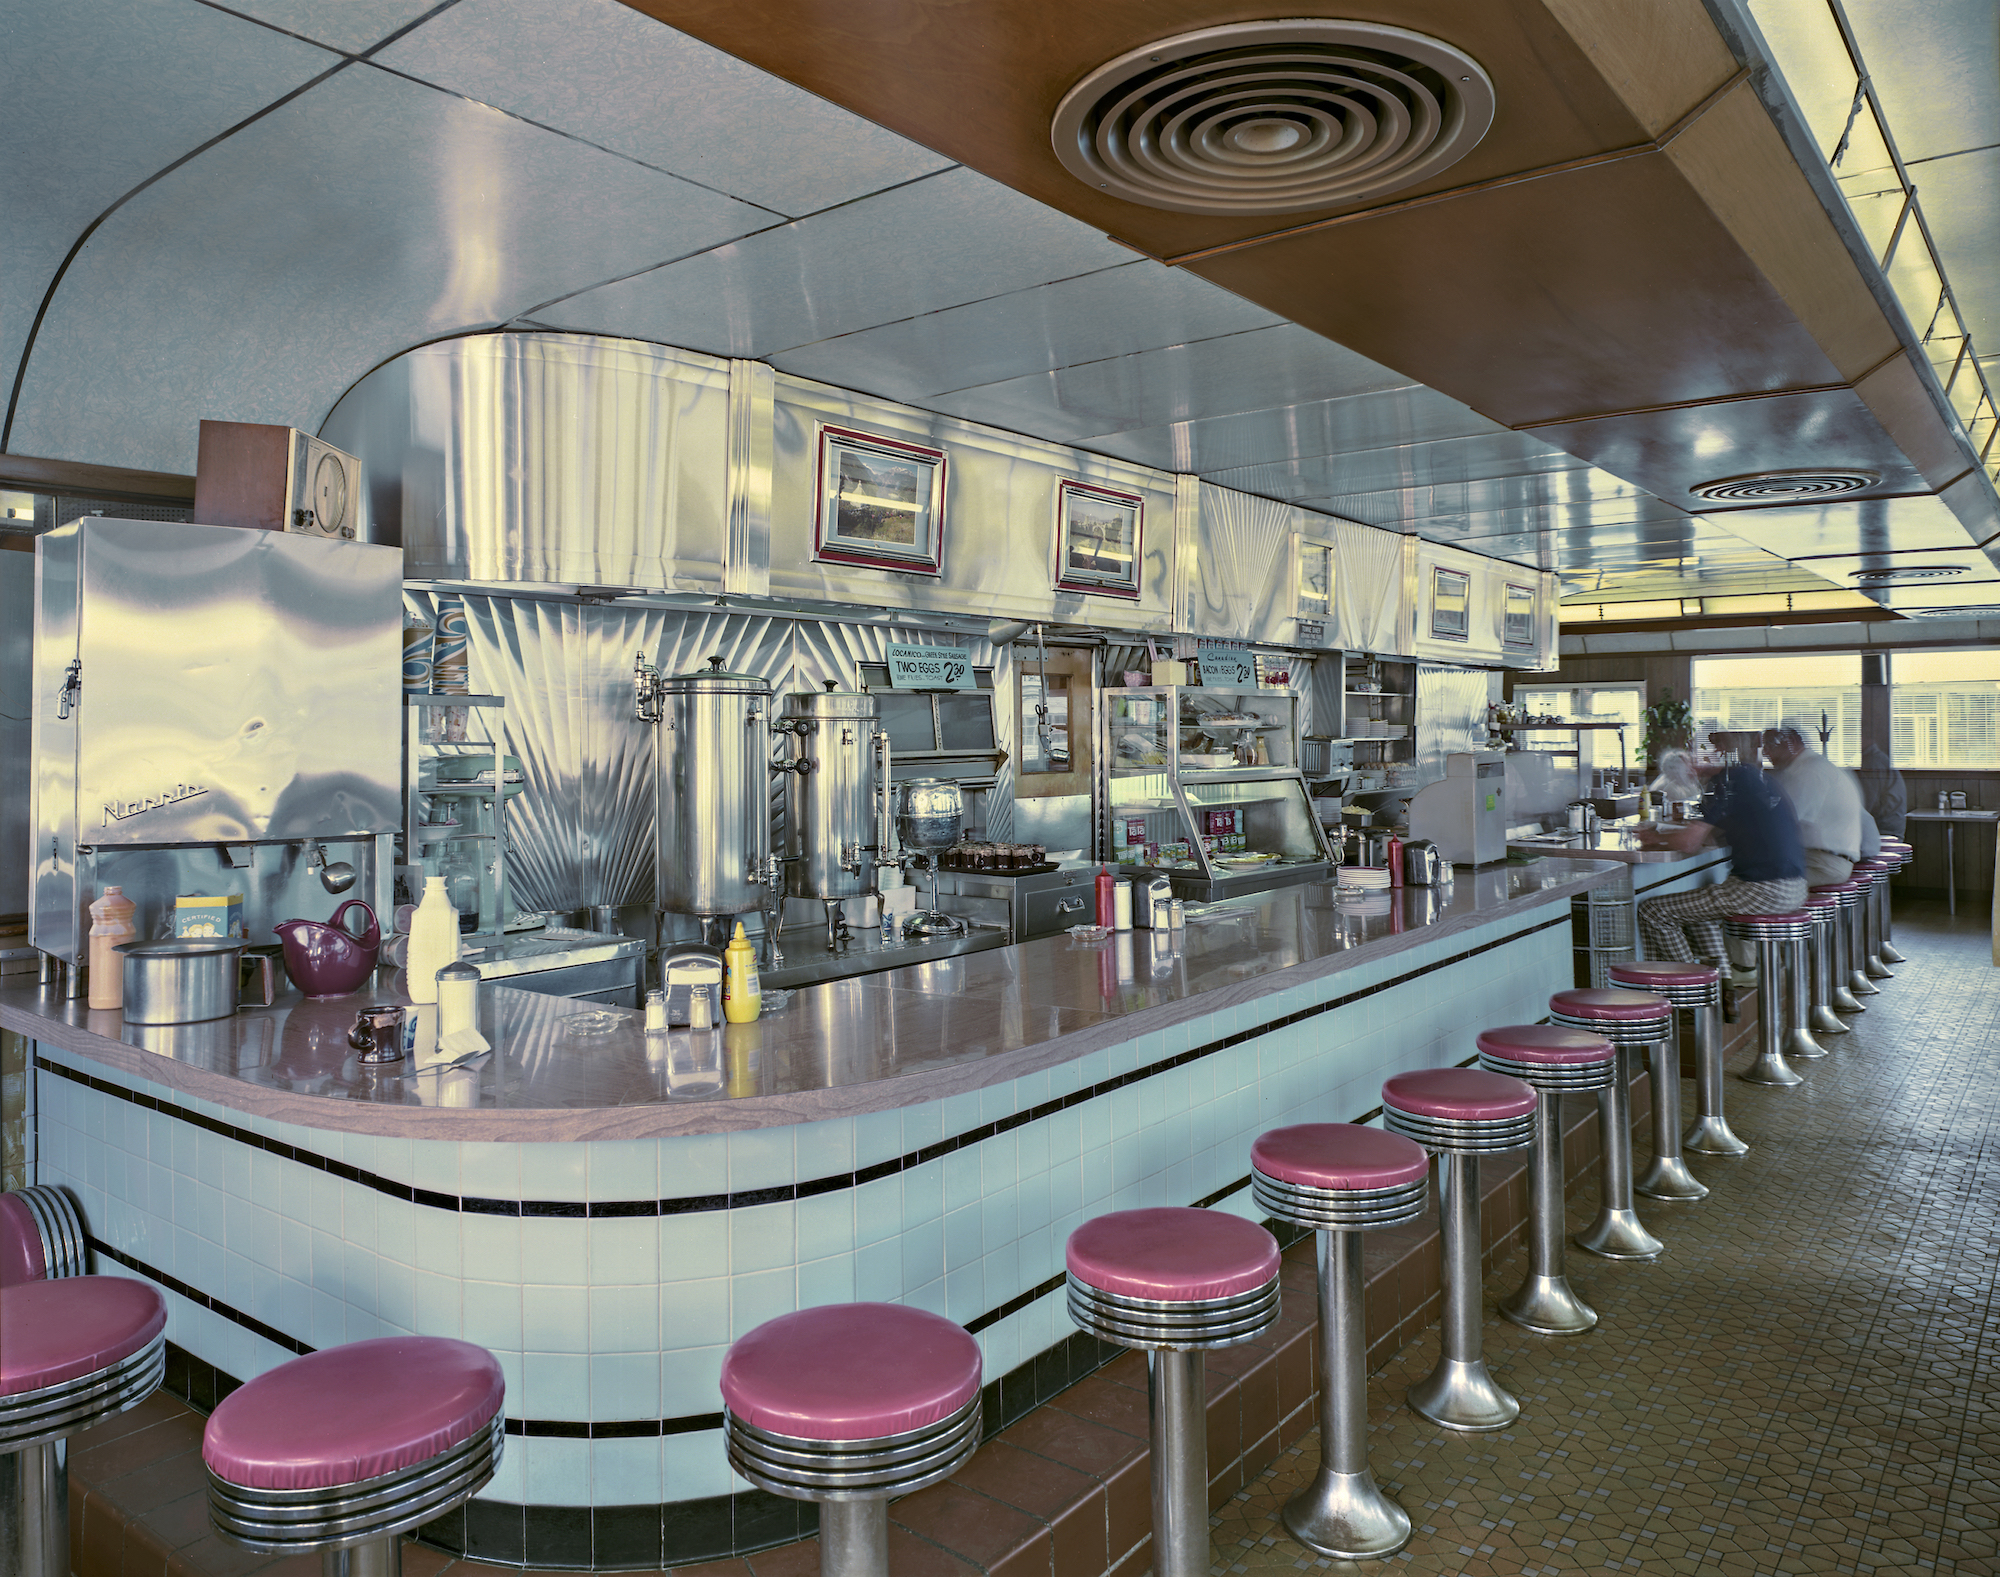 Jim Dow, The Town Diner interior, US 20, Watertown, Massachusetts, 1979. Courtesy the artist